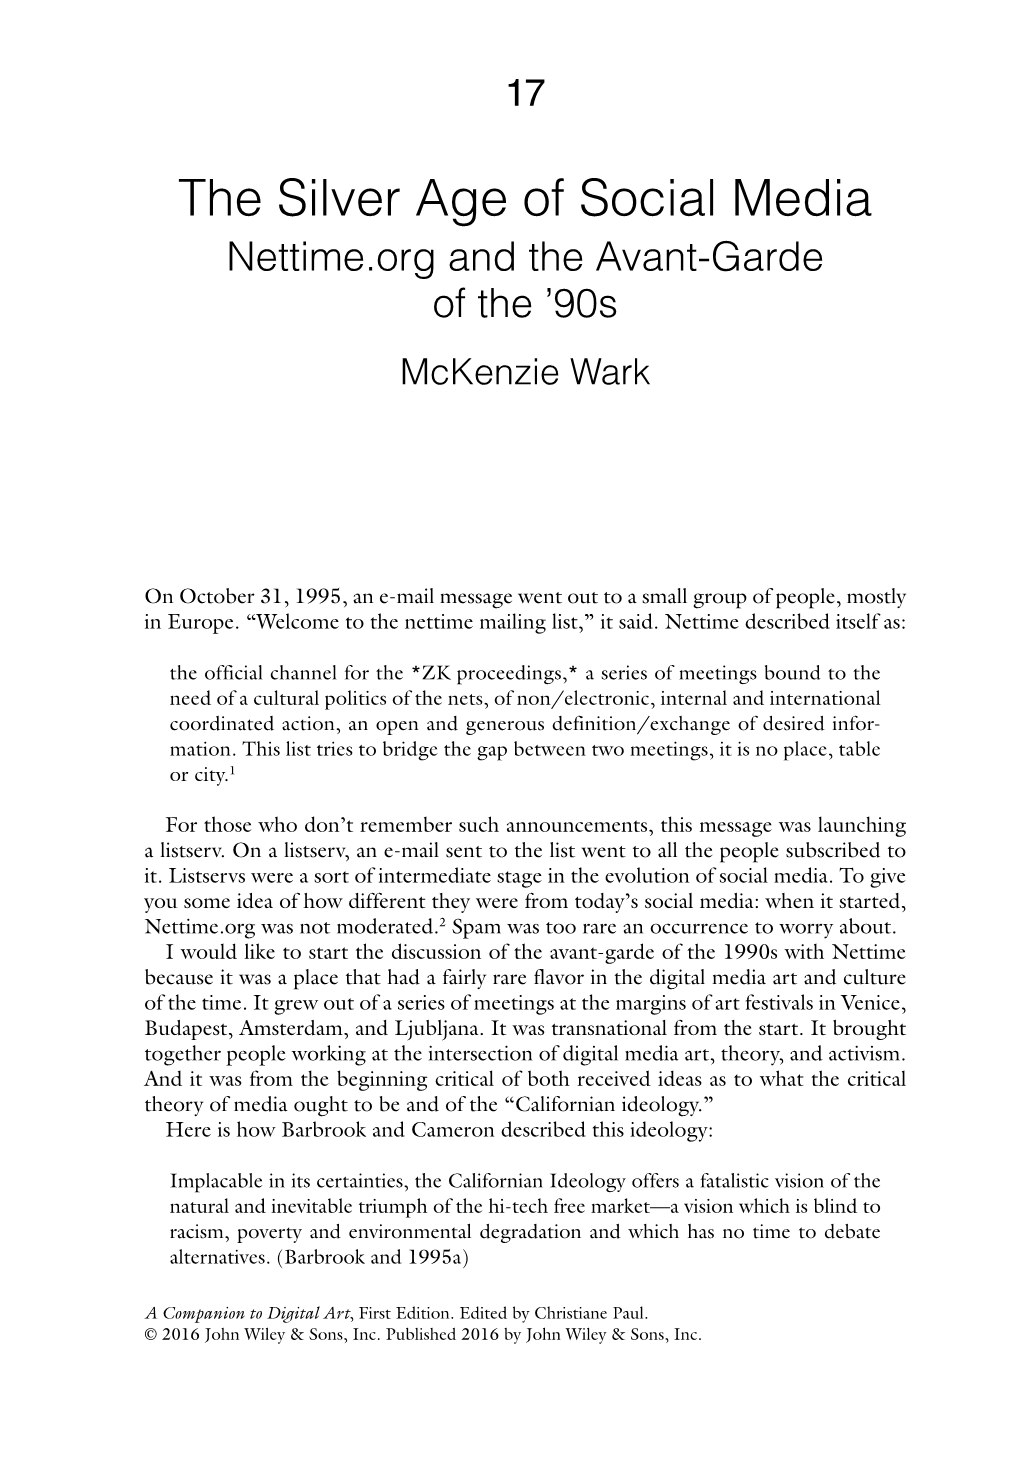 The Silver Age of Social Media Nettime.Org and the Avant‐Garde of the ’90S Mckenzie Wark